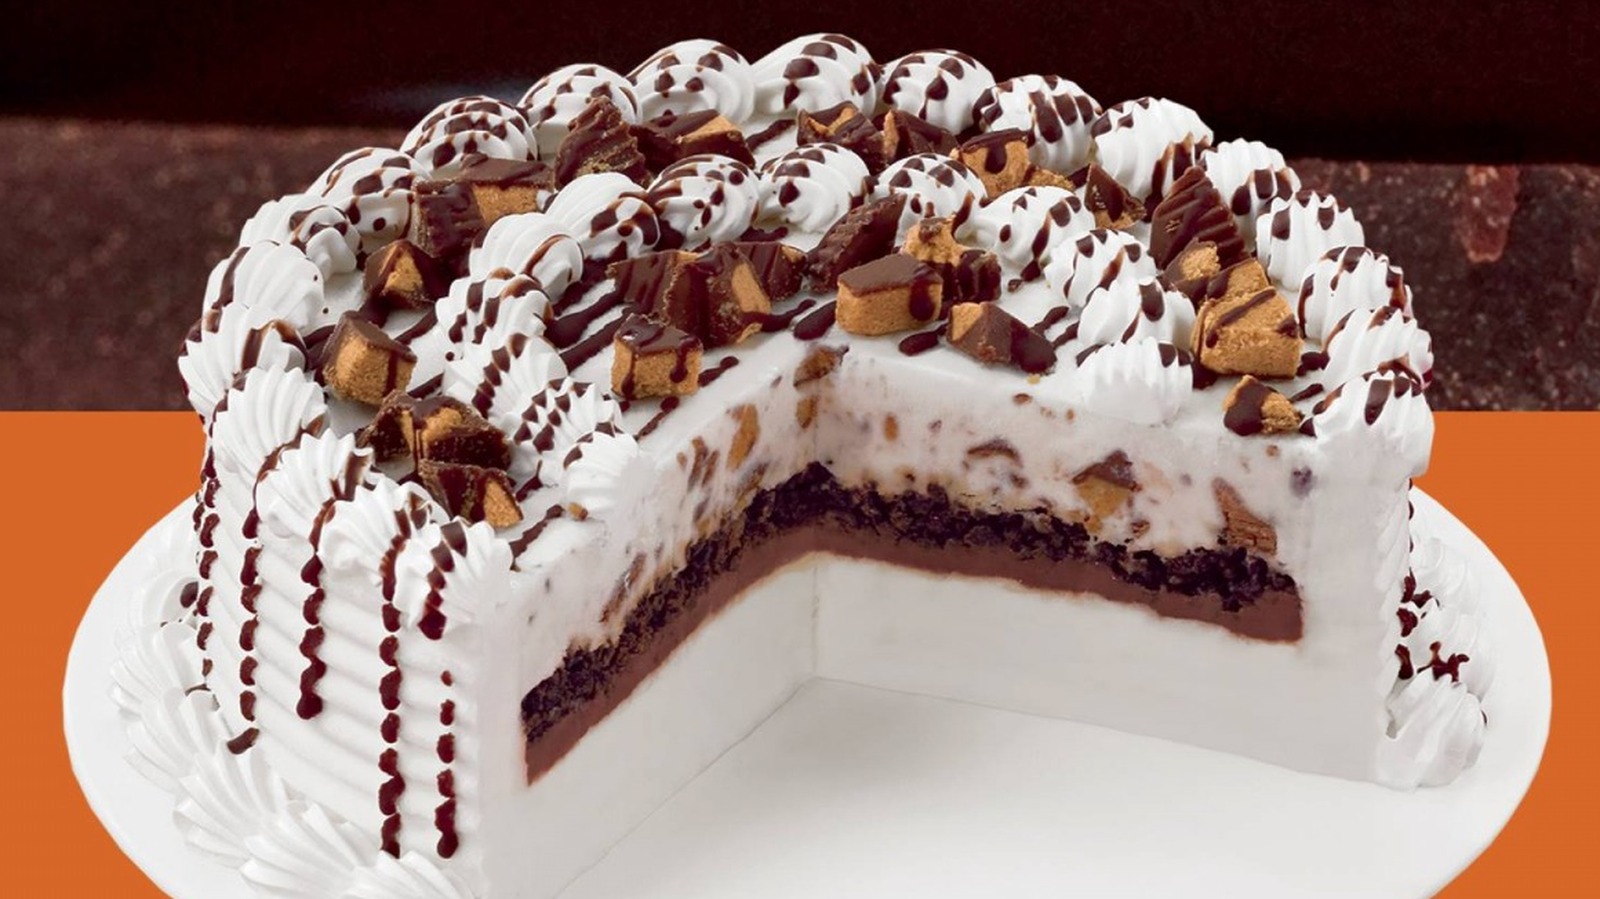 The Fascinating Way Dairy Queen Makes Their Ice Cream Cakes In-Store